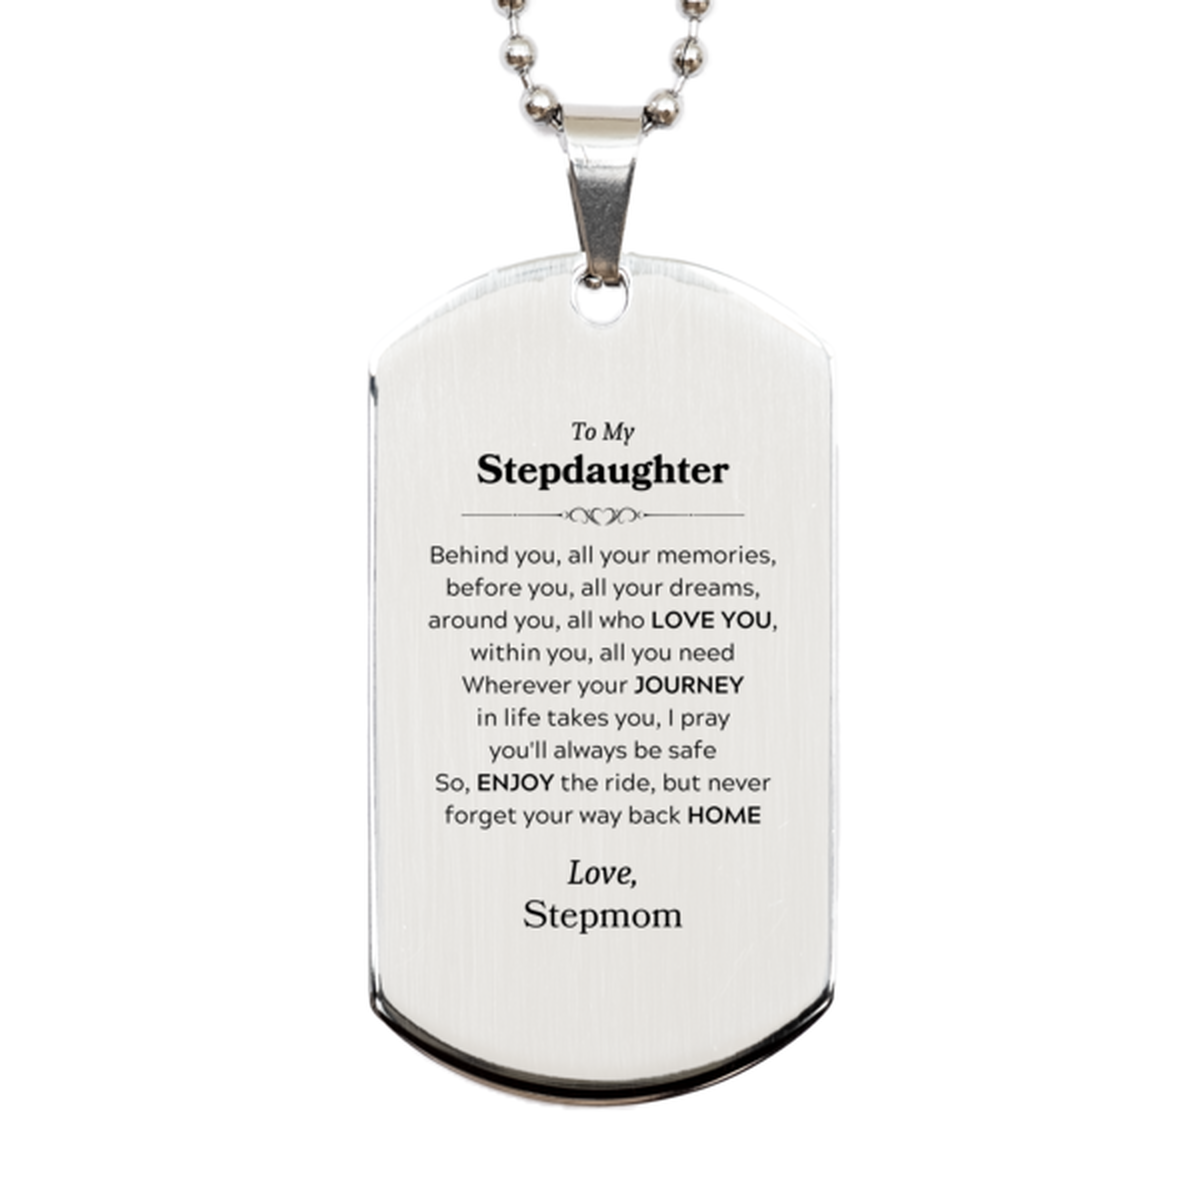 To My Stepdaughter Graduation Gifts from Stepmom, Stepdaughter Silver Dog Tag Christmas Birthday Gifts for Stepdaughter Behind you, all your memories, before you, all your dreams. Love, Stepmom